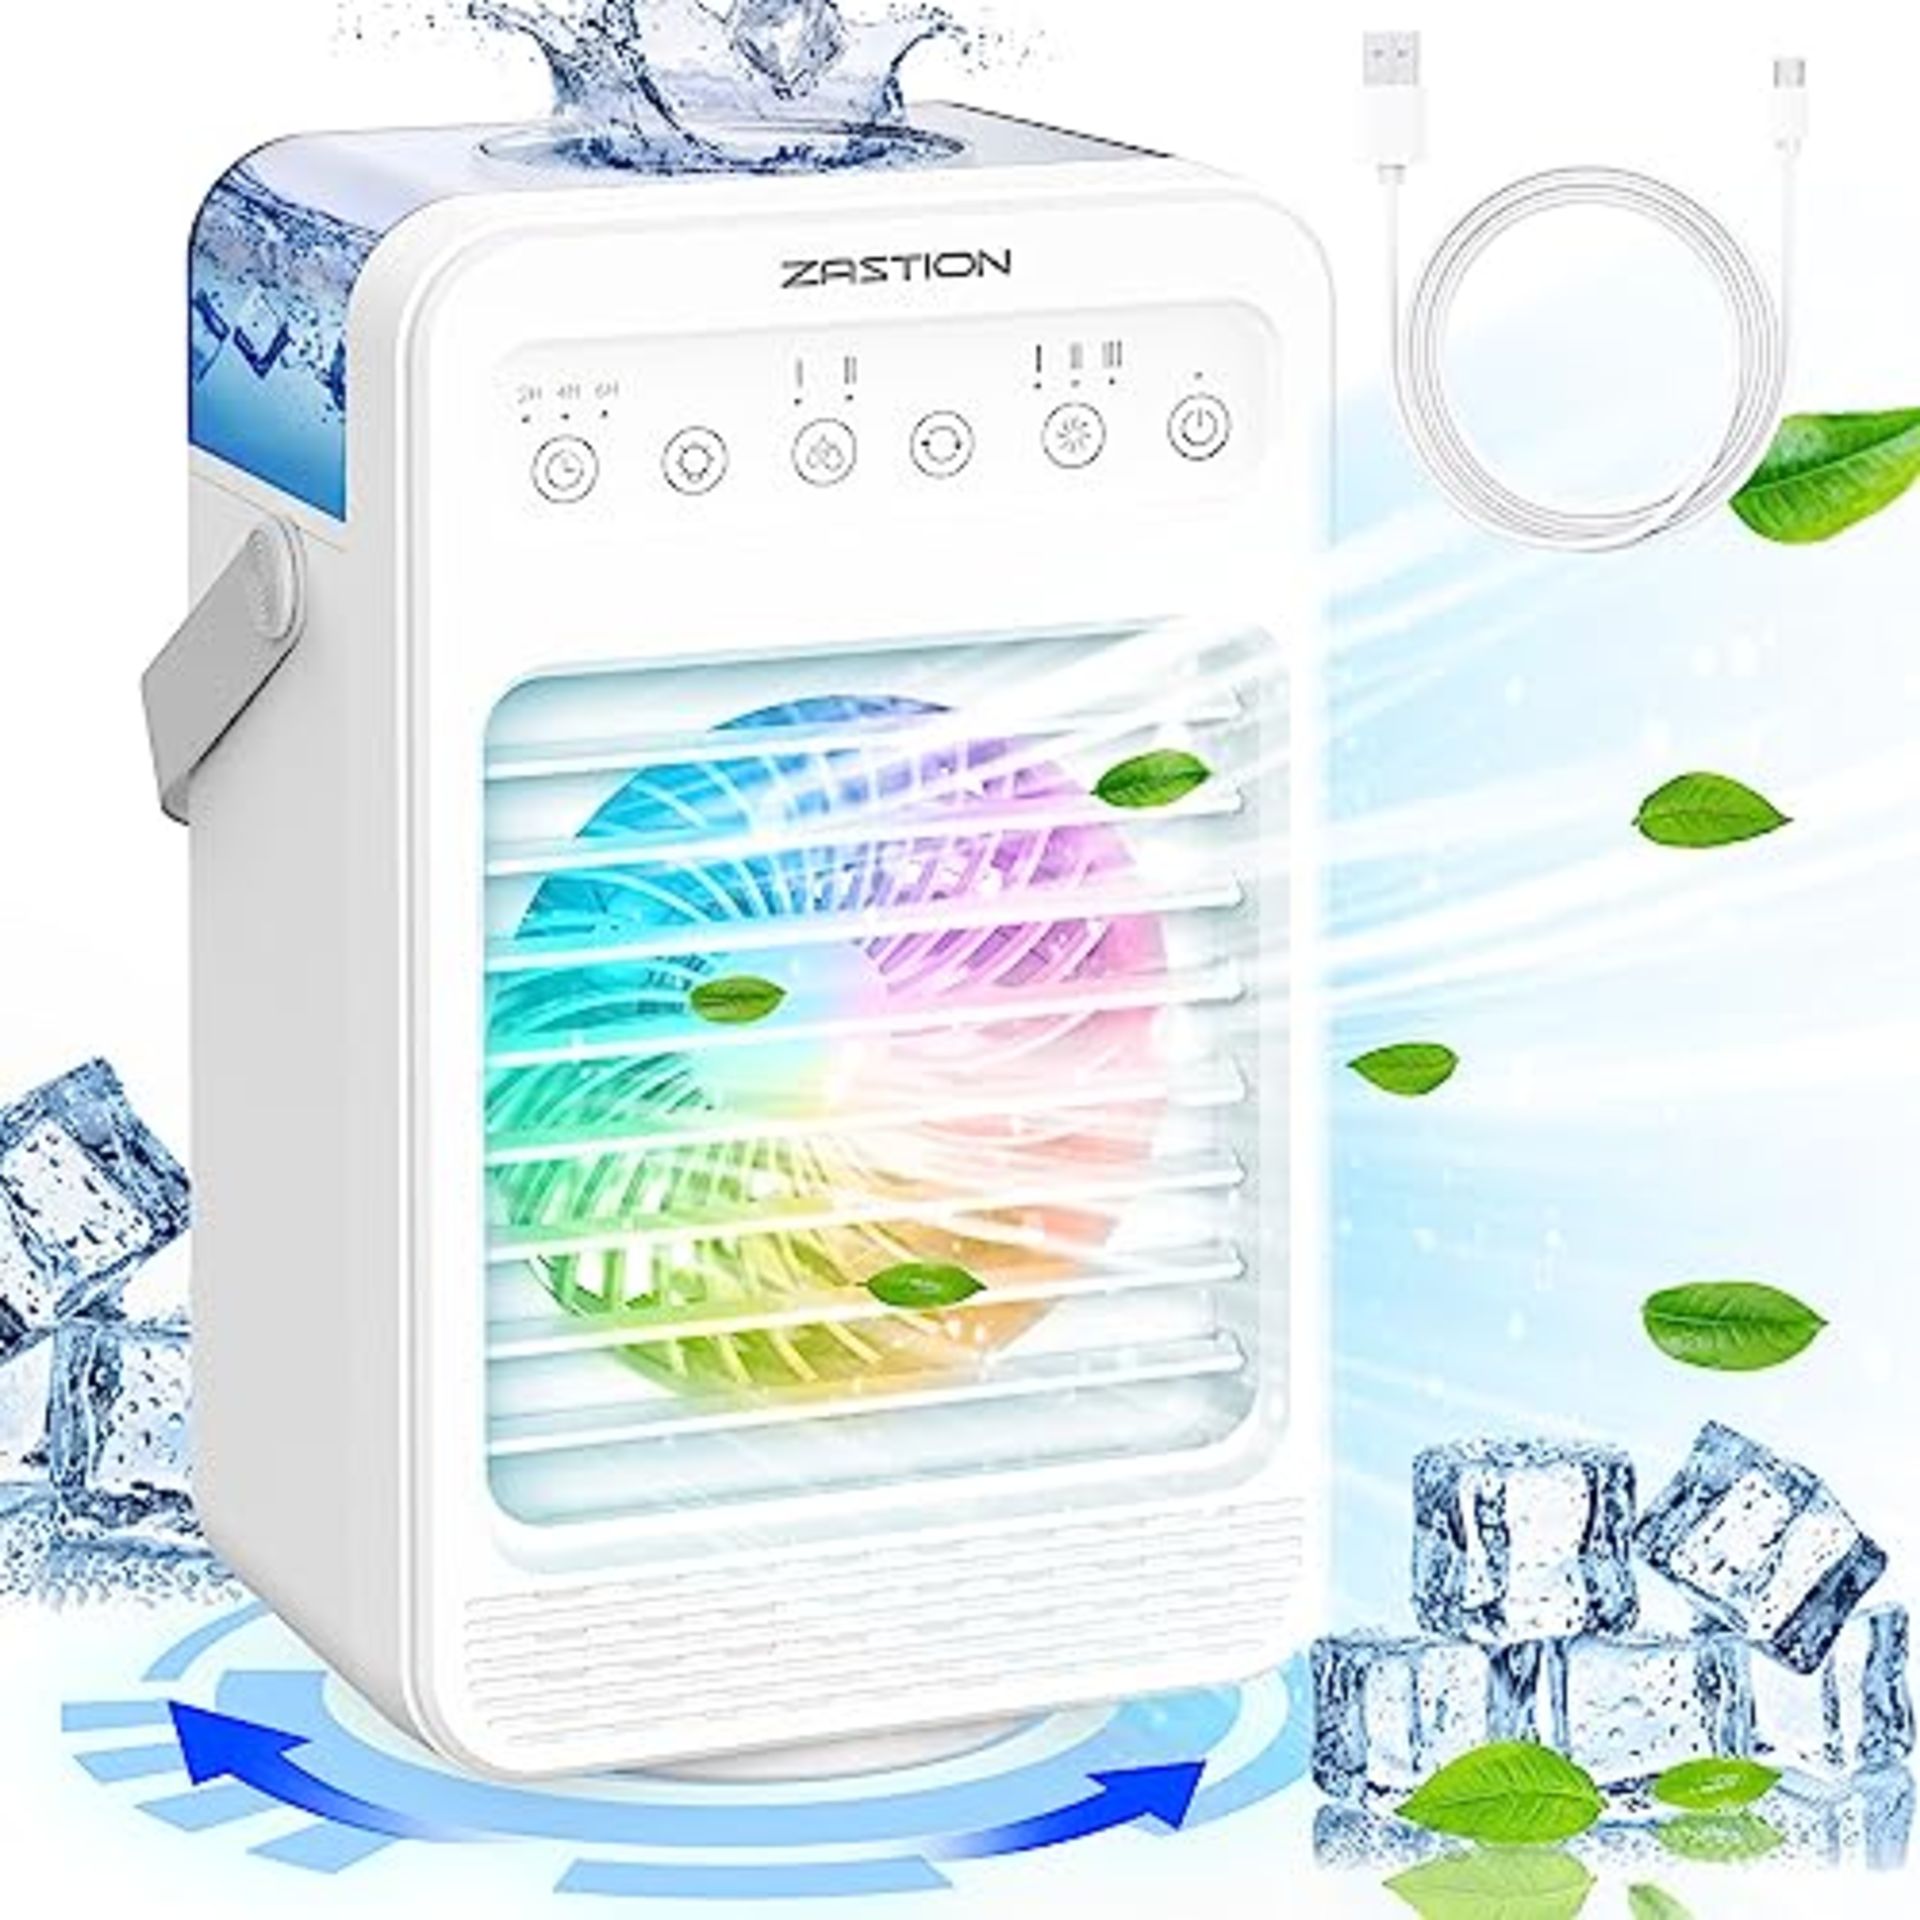 Air Coolers for Home, ZASTION Portable Air Conditioner 4 in 1 Mini Evaporative Cooler